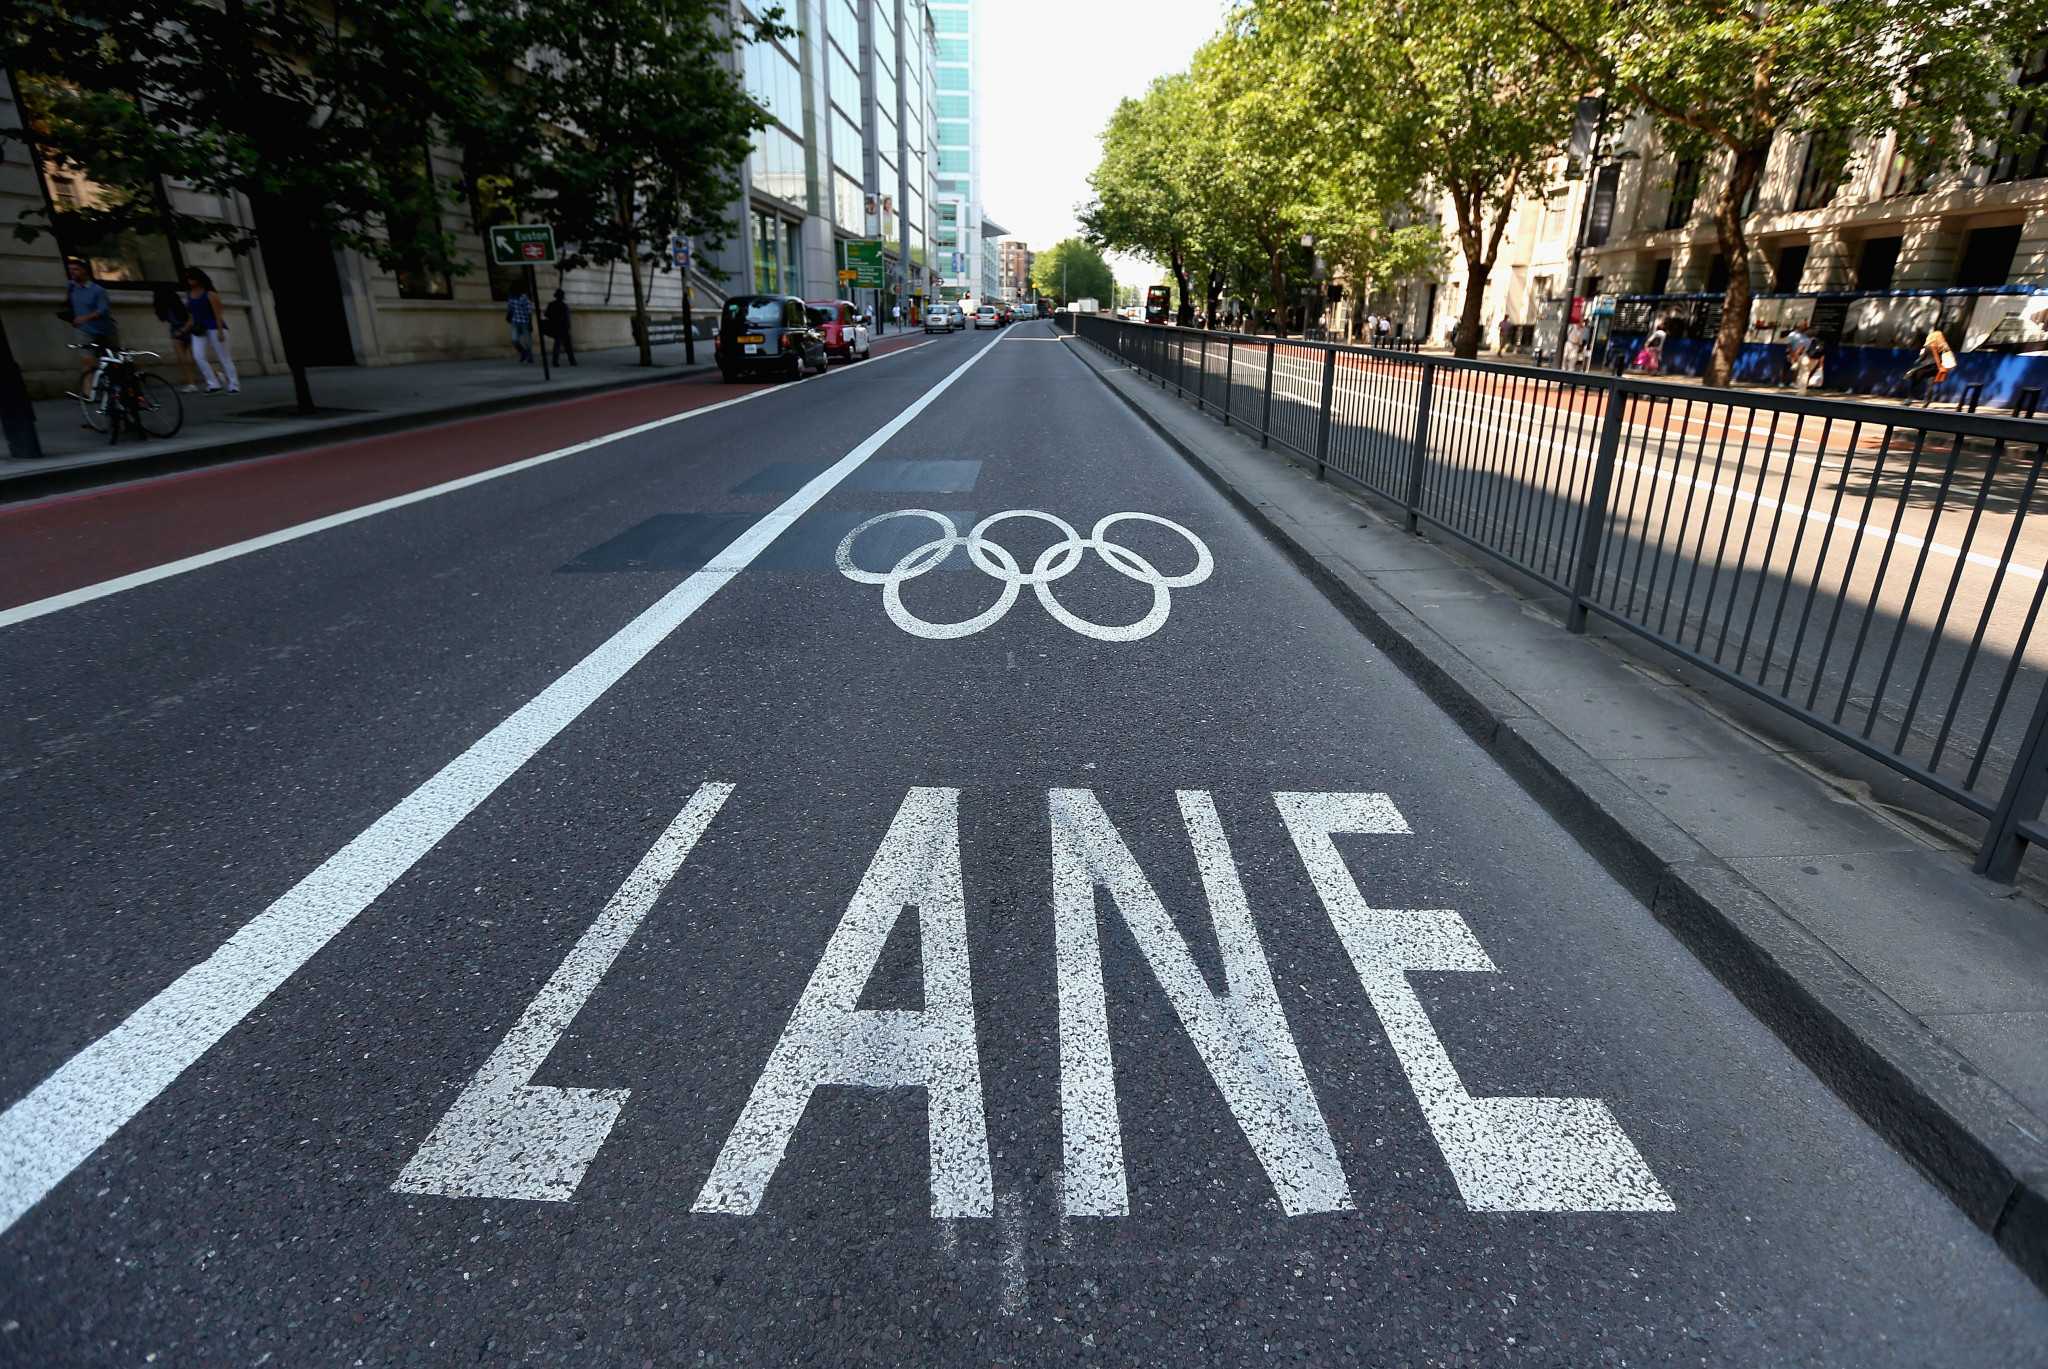 Priority lanes similar to those employed in Tokyo are set to be in force for Olympic and Paralympic transport throughout the summer in Paris next year ©Getty Images